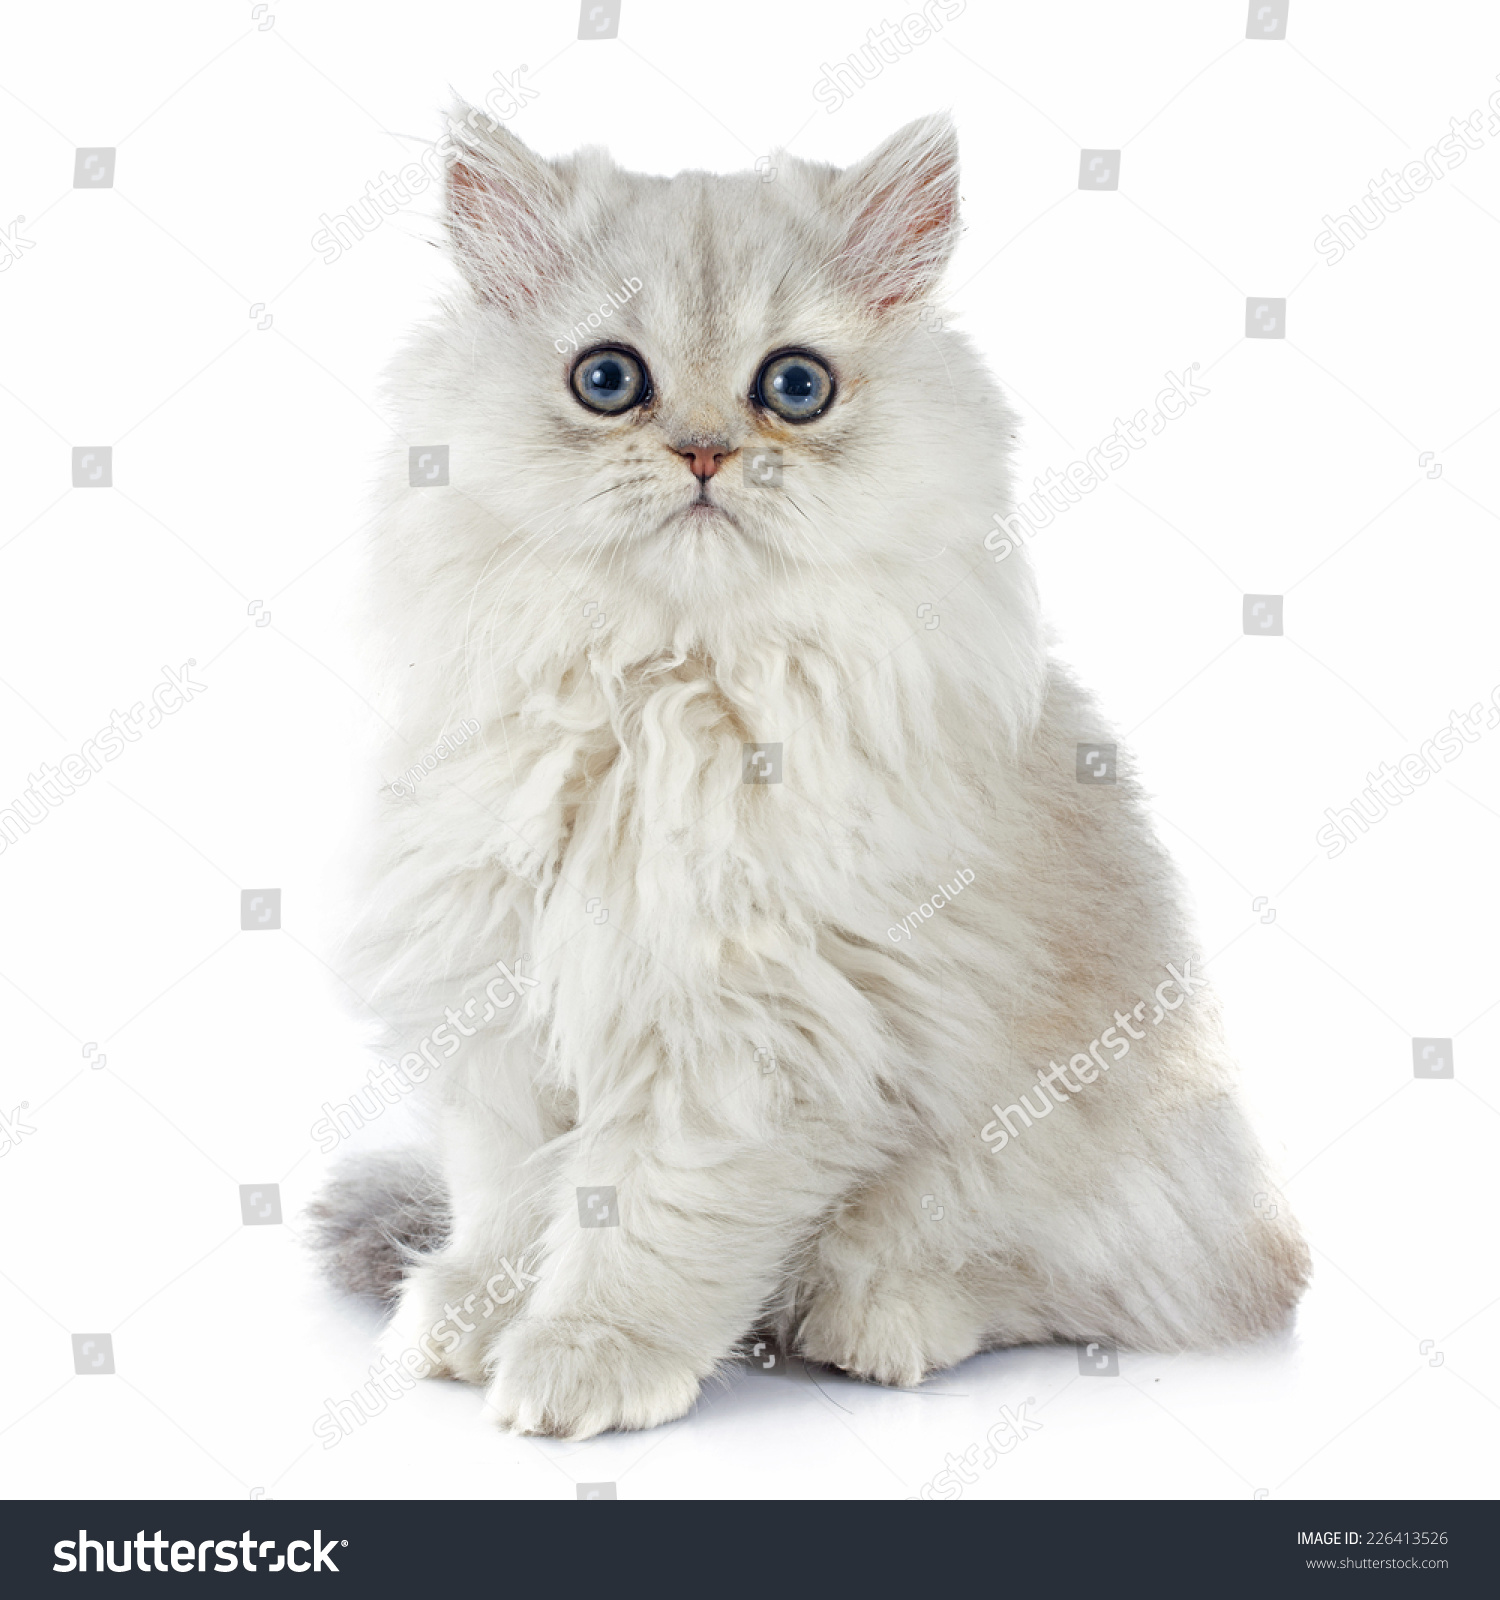 persian kitten in front of white background #226413526